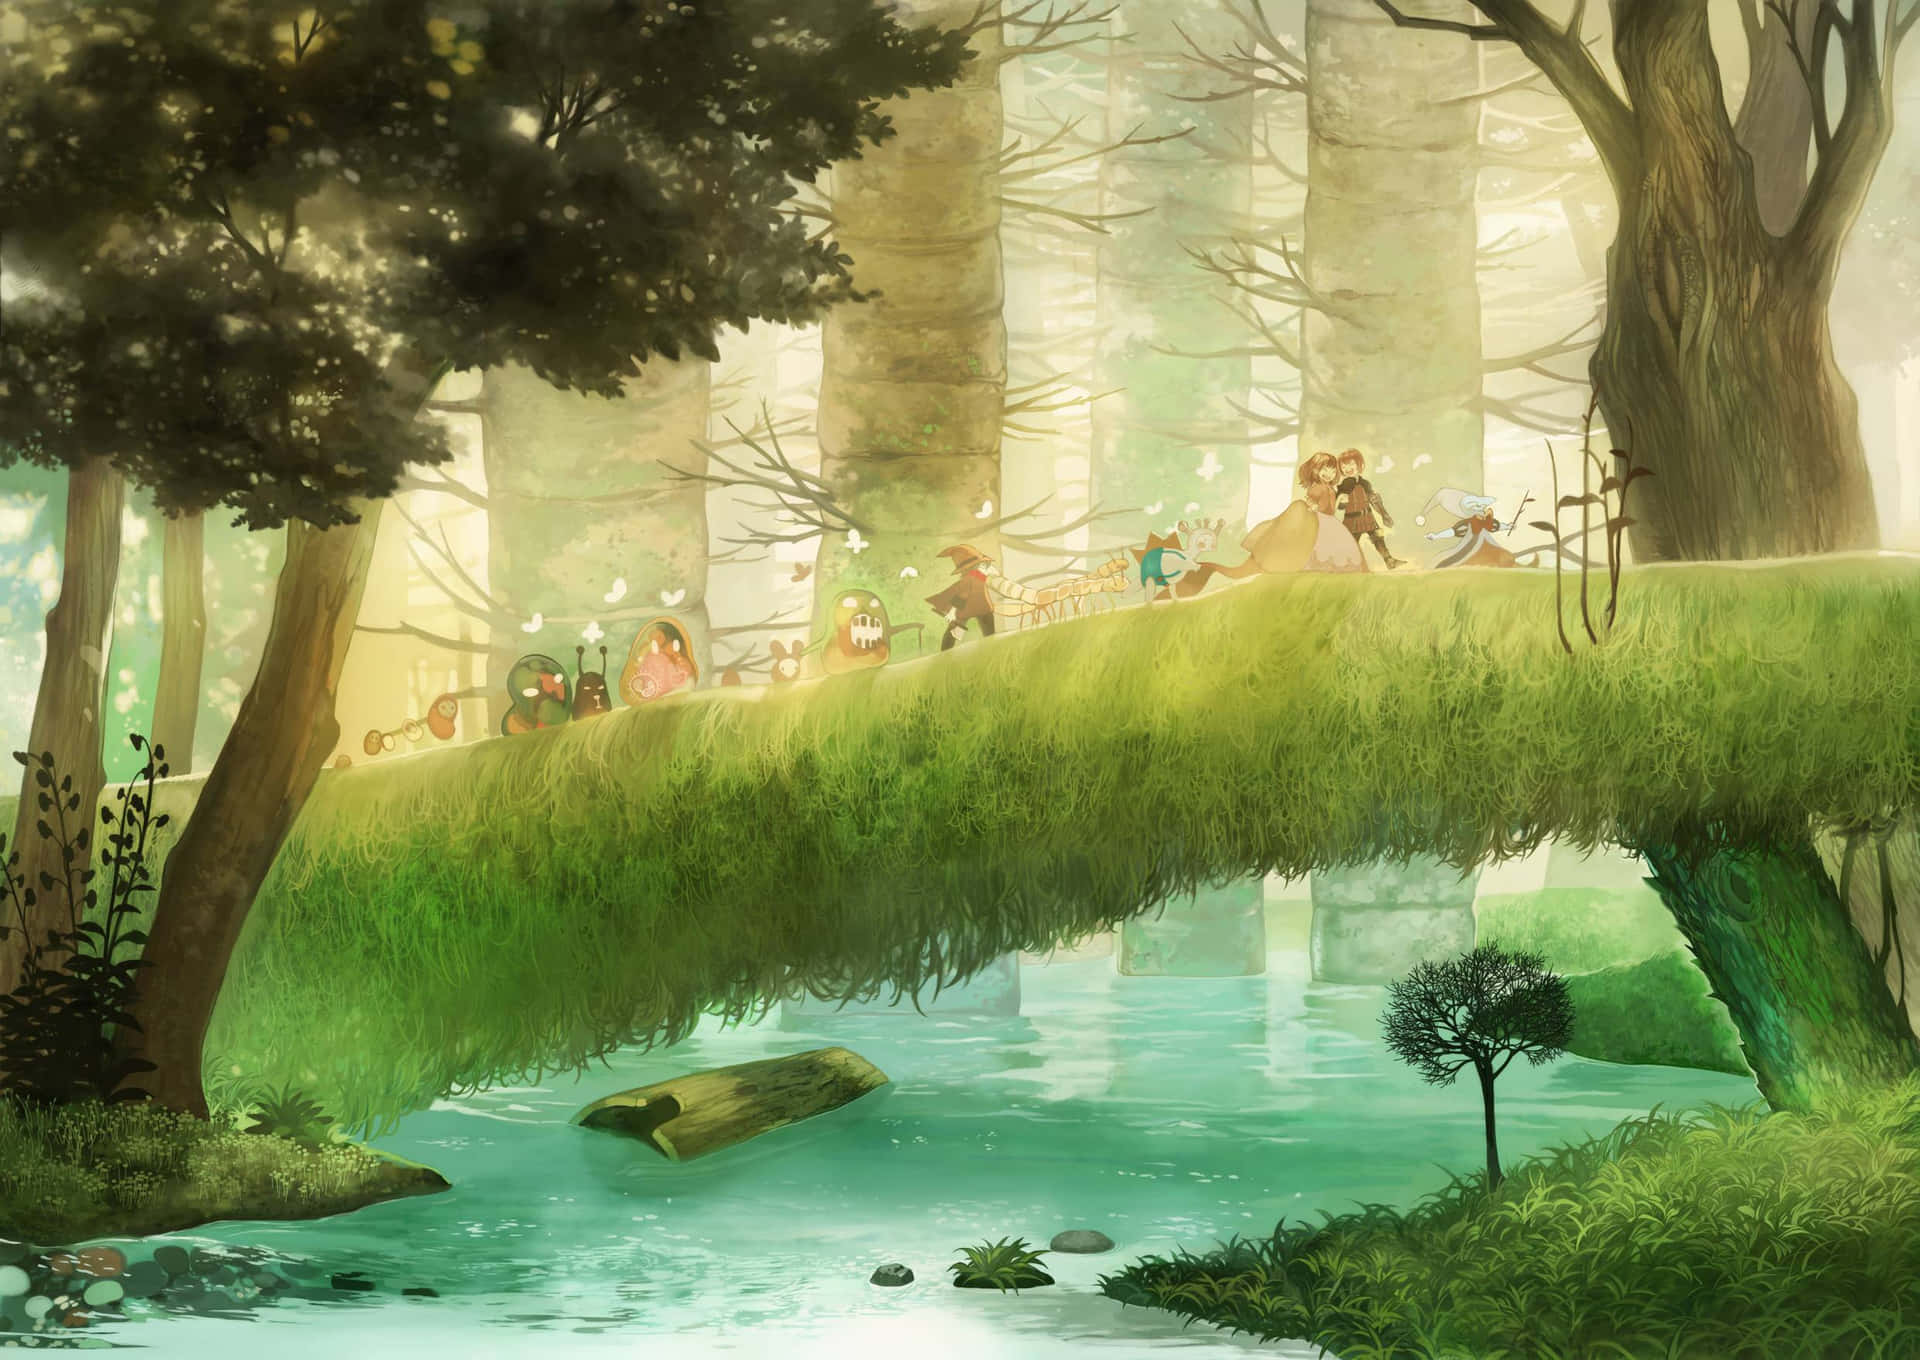 Anime background  Anime scenery, Scenery, Forest art